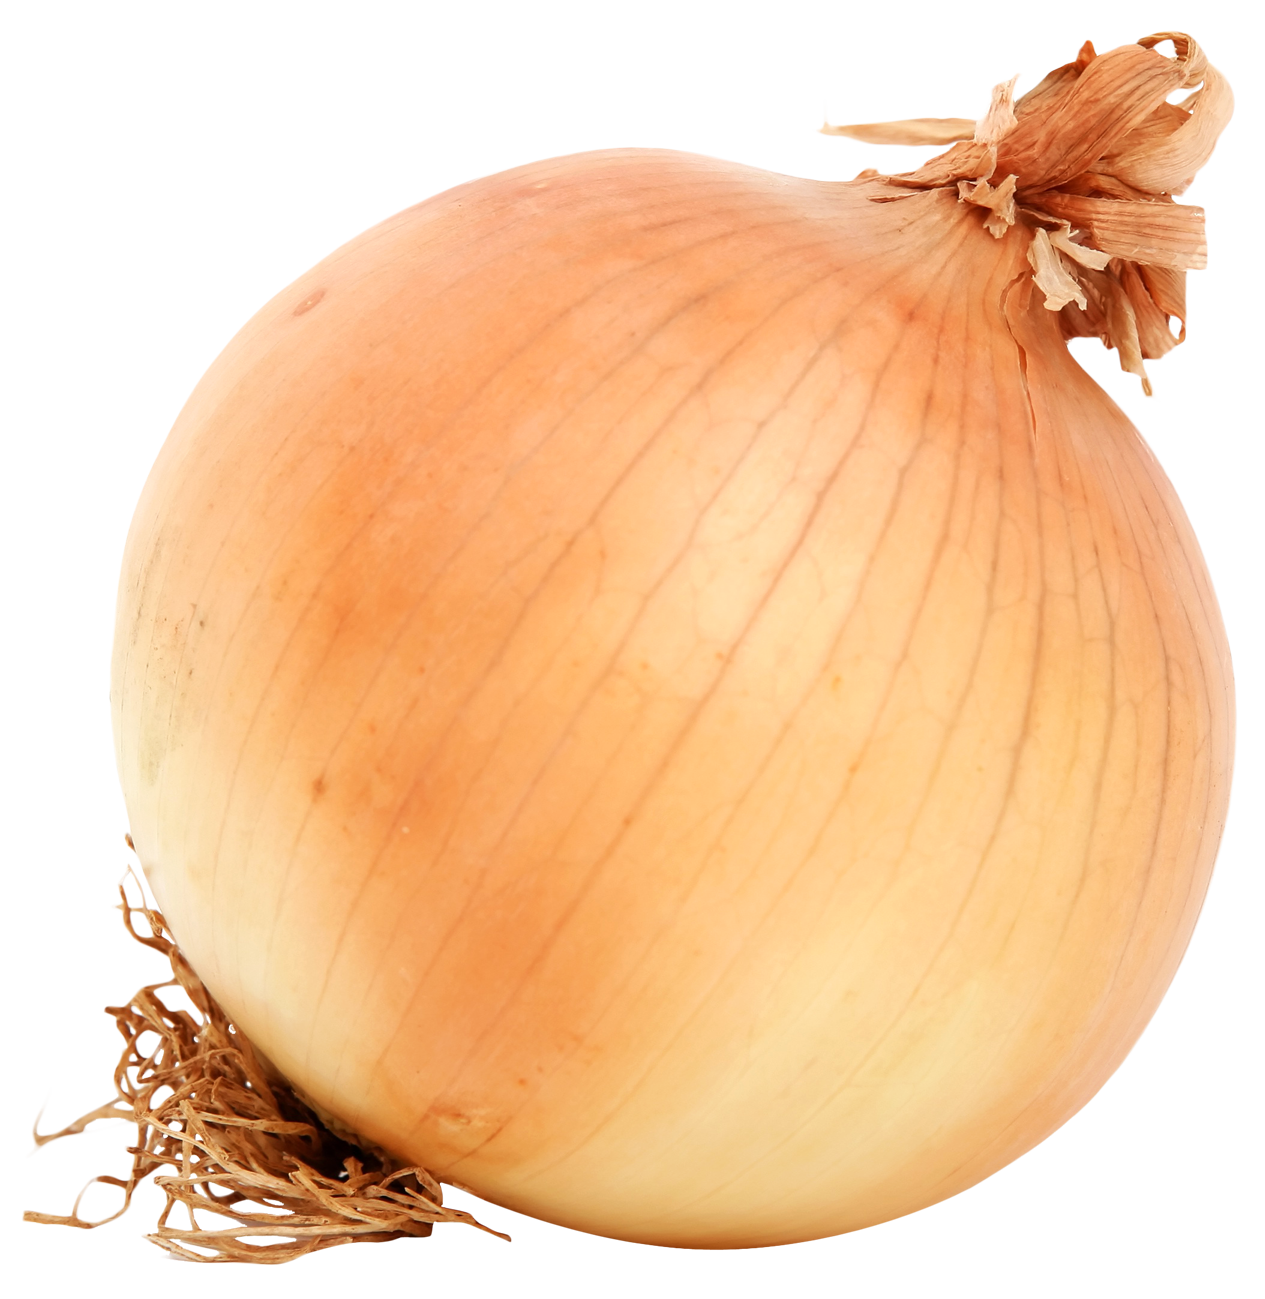 164056-onion-free-transparent-image-hd-png.373228